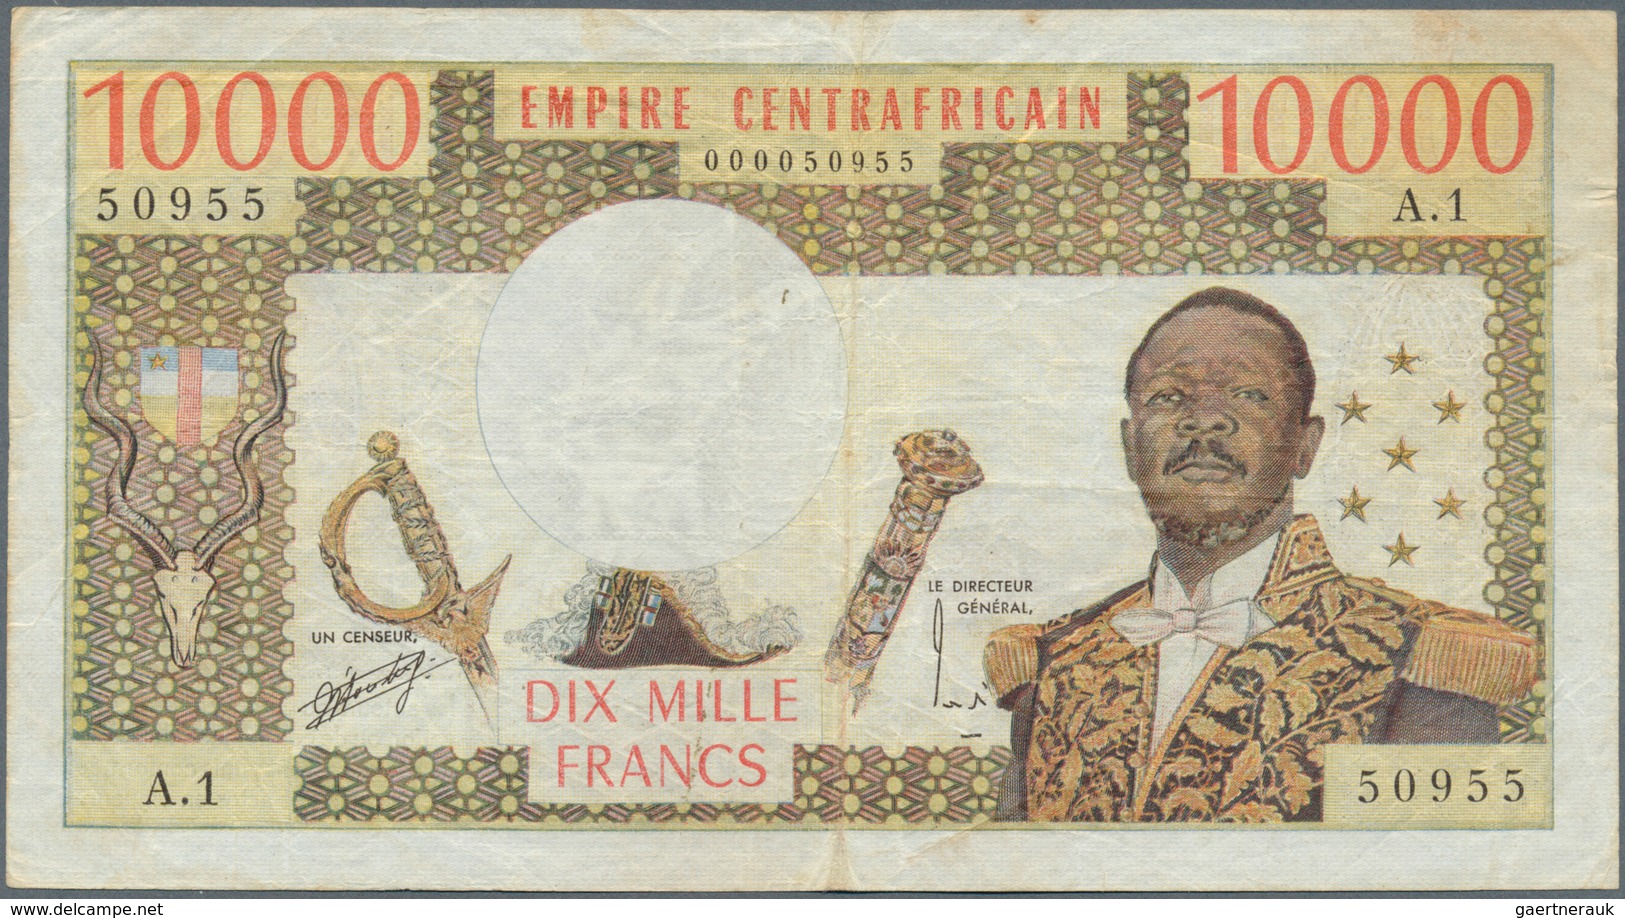 01269 Central African Republic / Zentralafrikanische Republik: 10.000 Francs ND Bokassa P. 9, Used With Fo - Central African Republic